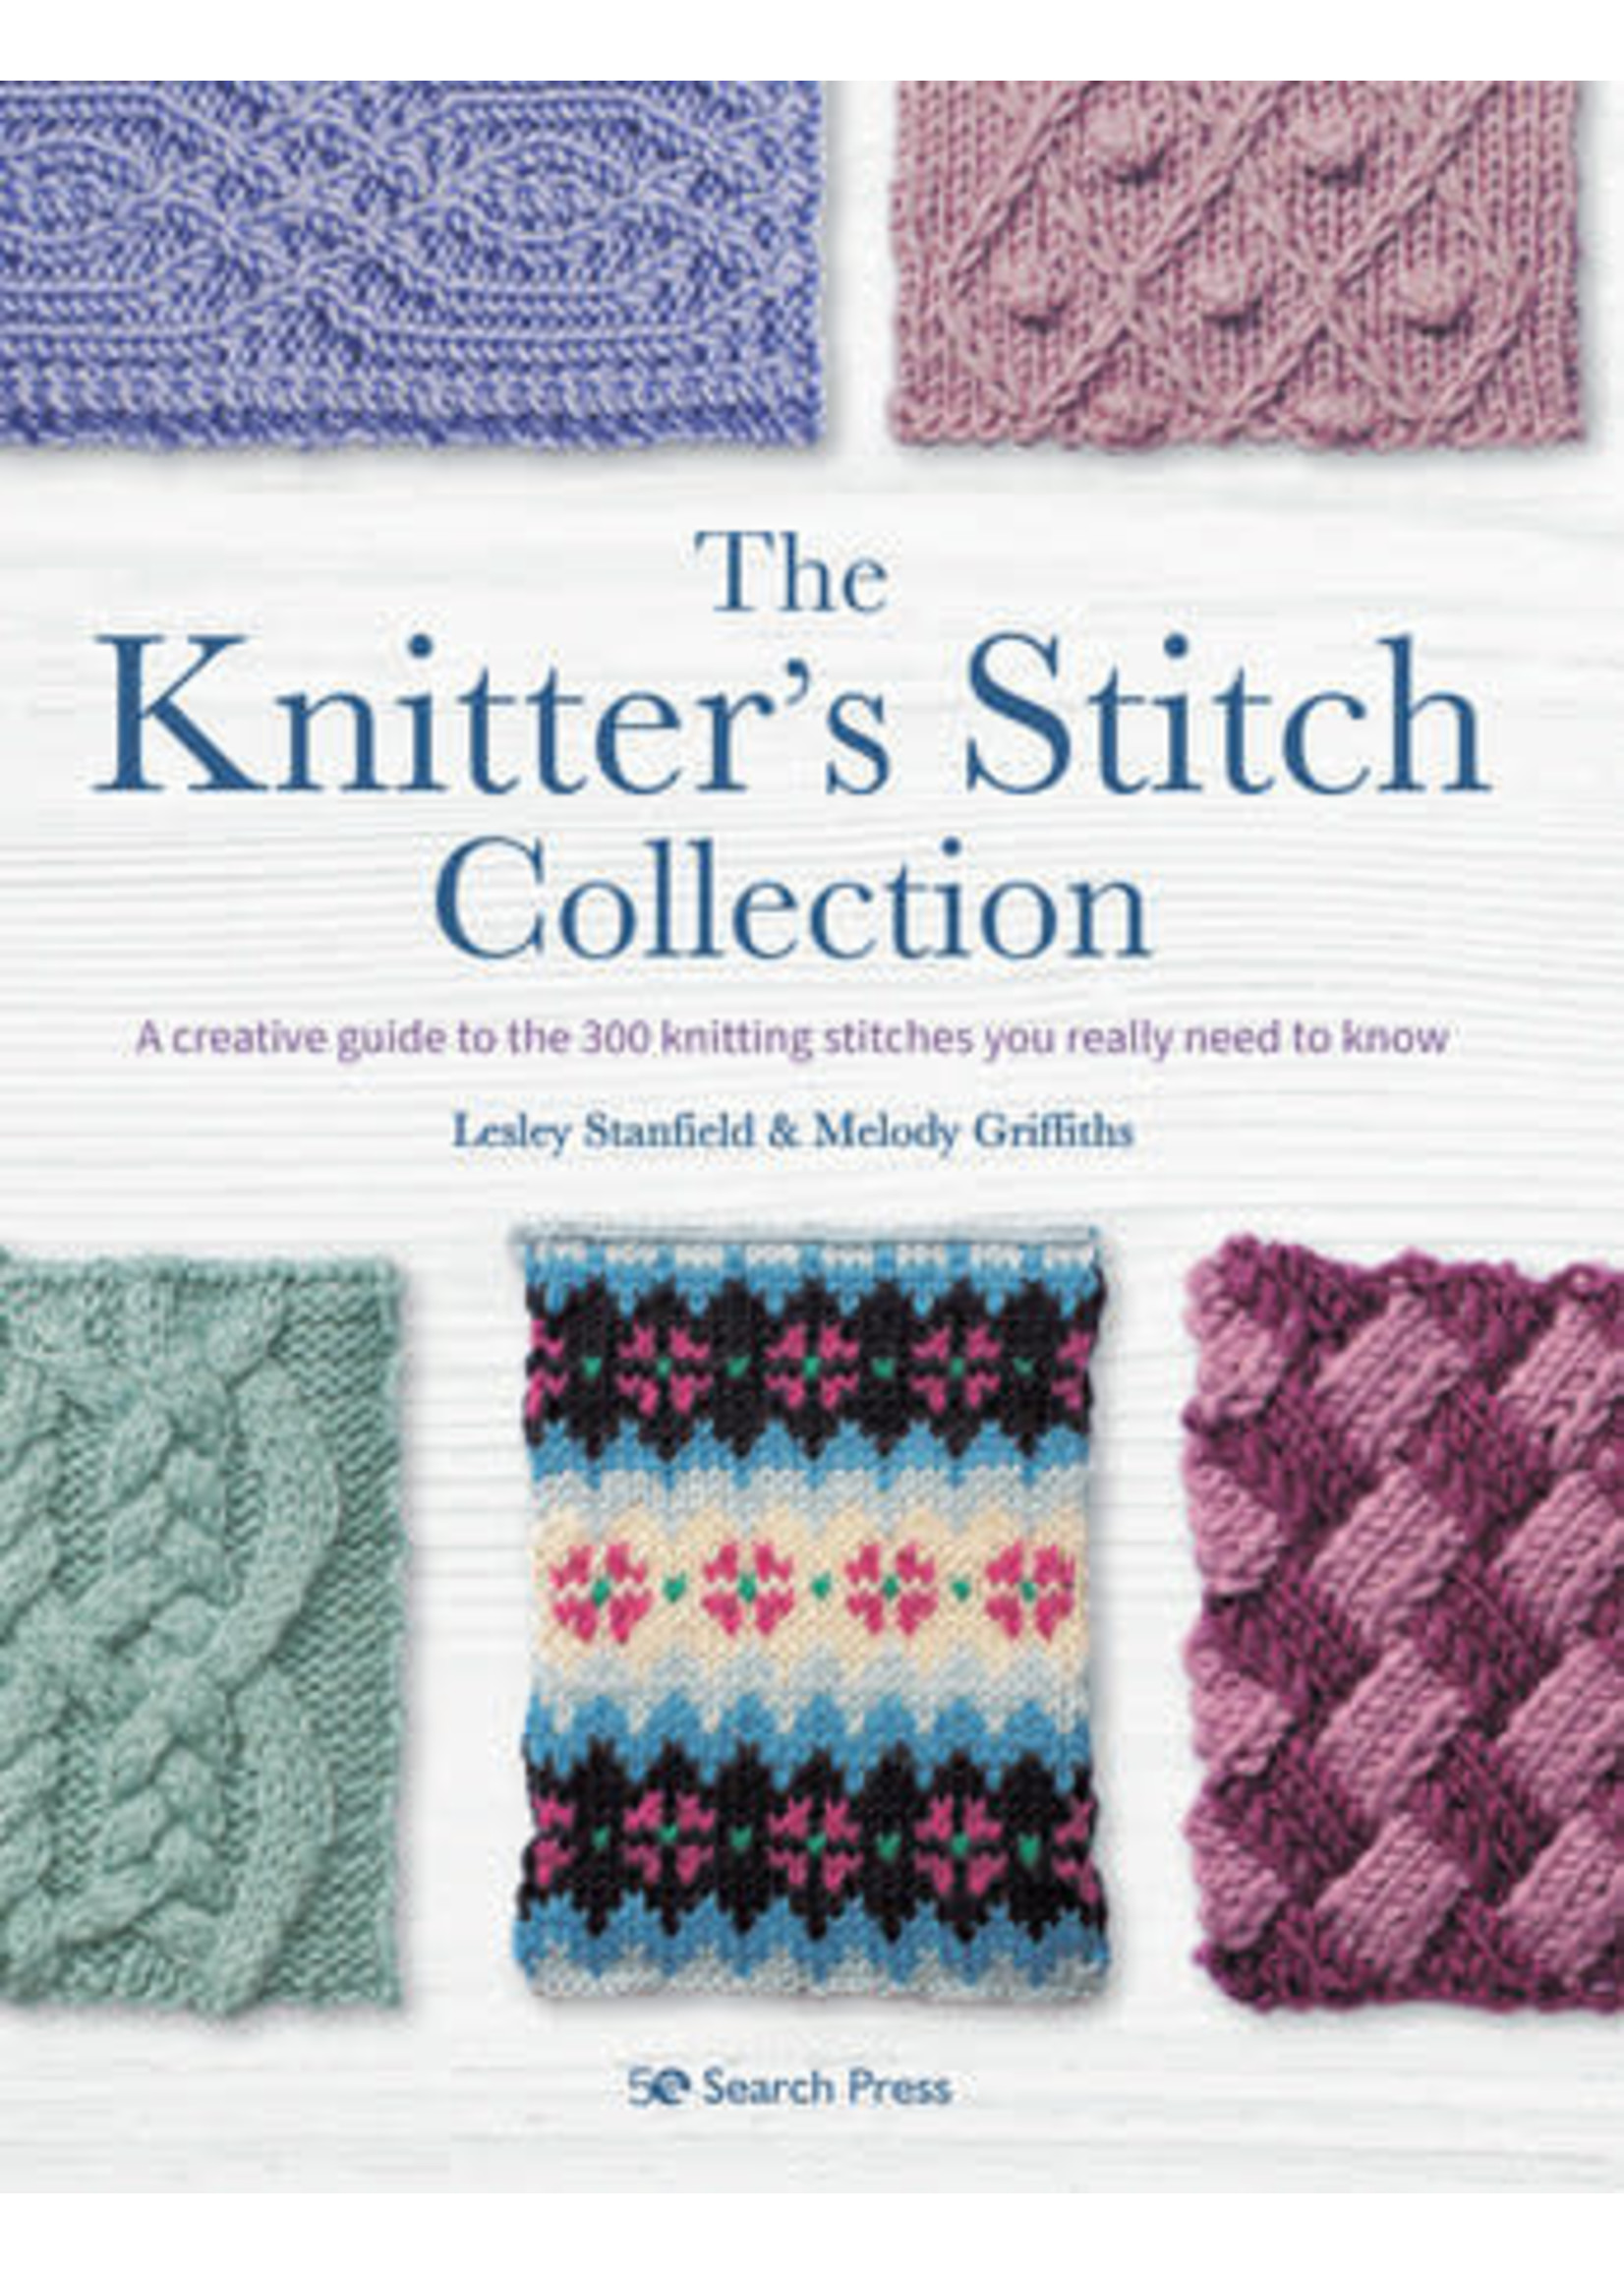 The Knitter's Stitch Collection: A Creative Guide to the 300 Knitting Stitches You Really Need to Know by Lesley Stanfield, Melody Griffiths